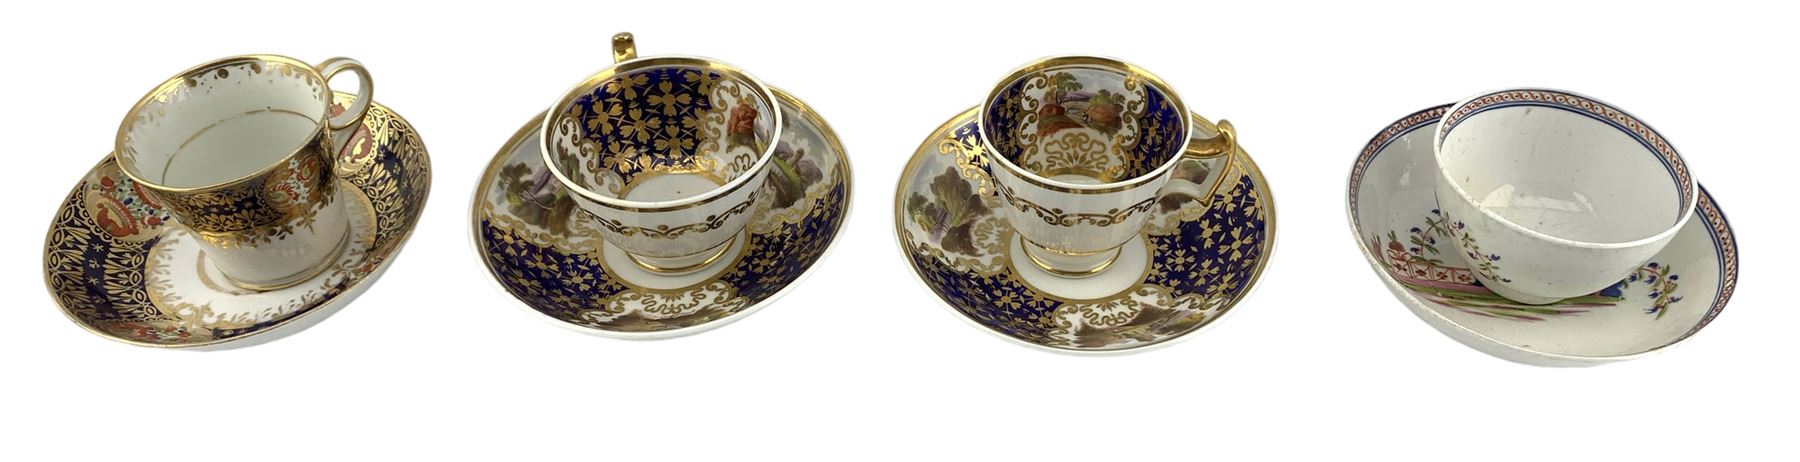 Collection of 18th and early 19th century English porcelain cups and saucers to include a Chamberlai - Image 7 of 12